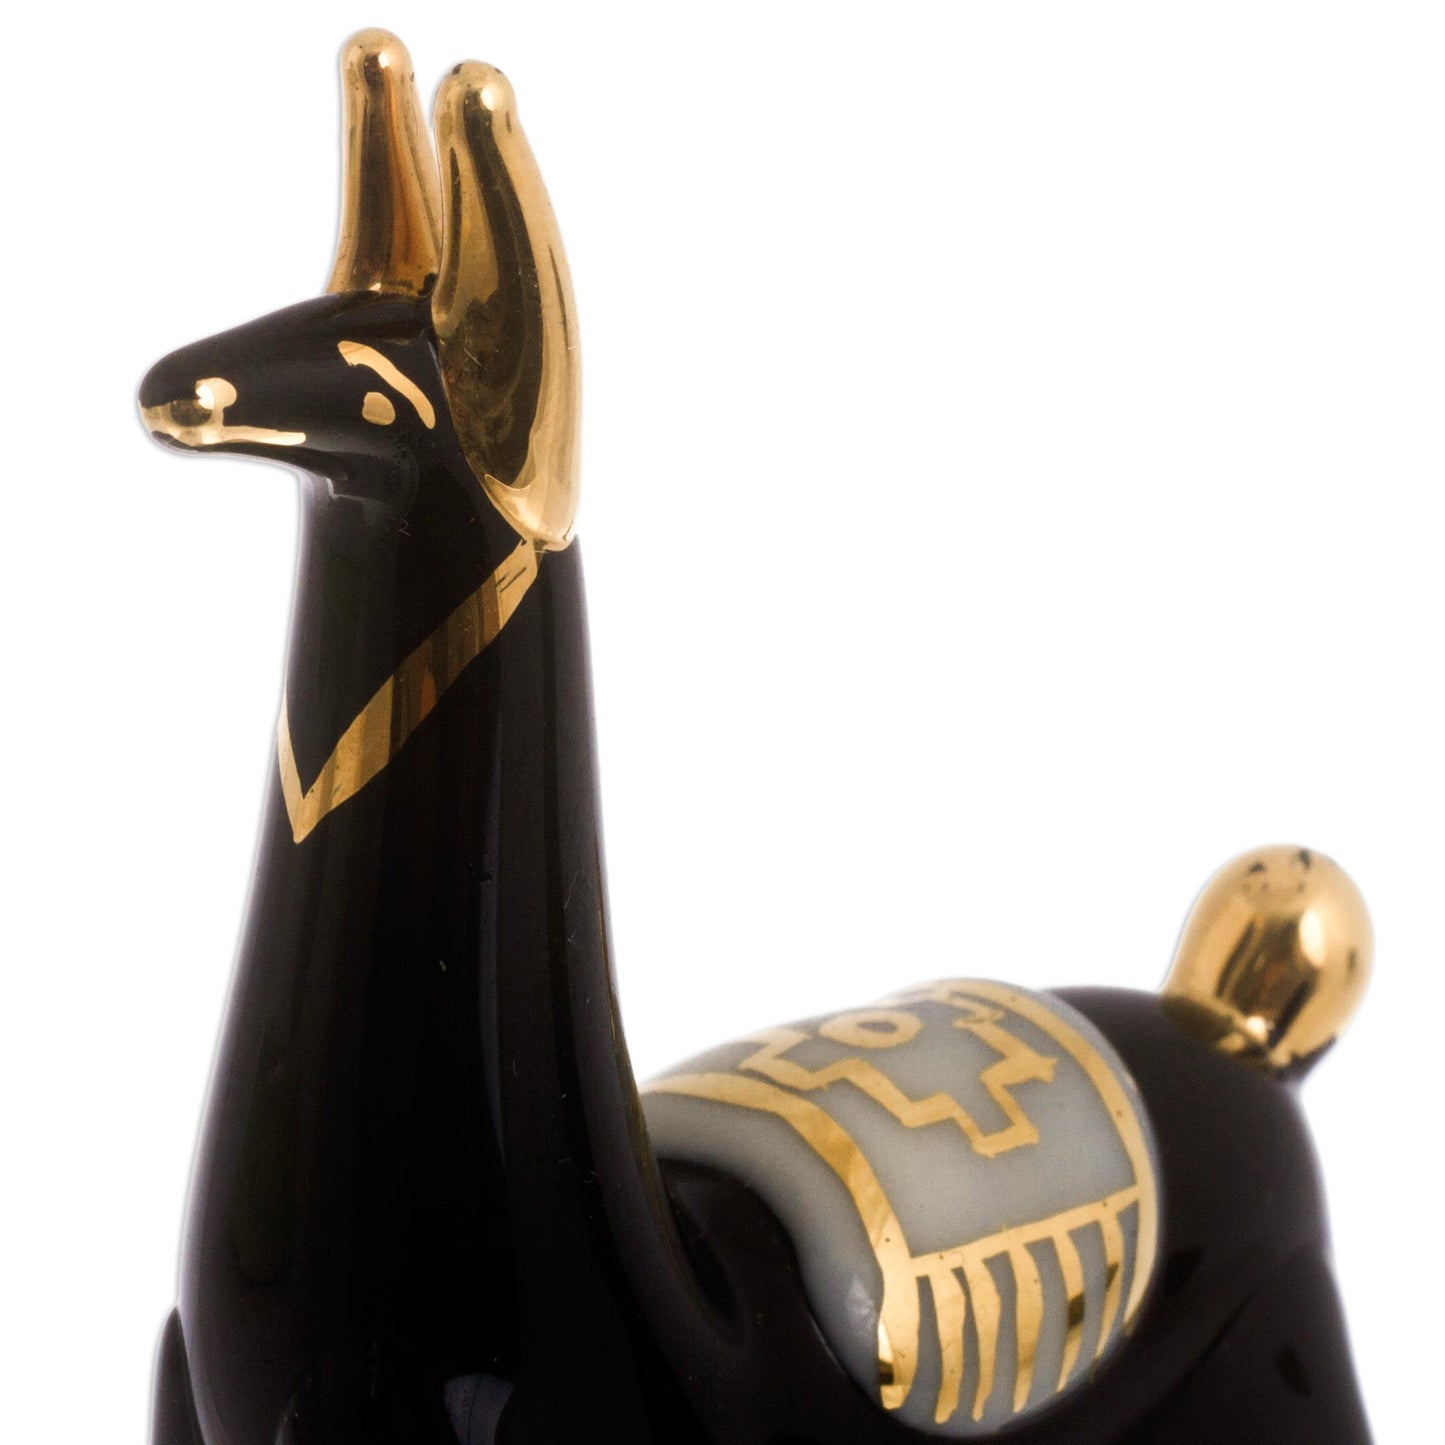 Black Llamas of the Andes Set of 4 Black Glass Llama Figurines with Gilded Accents